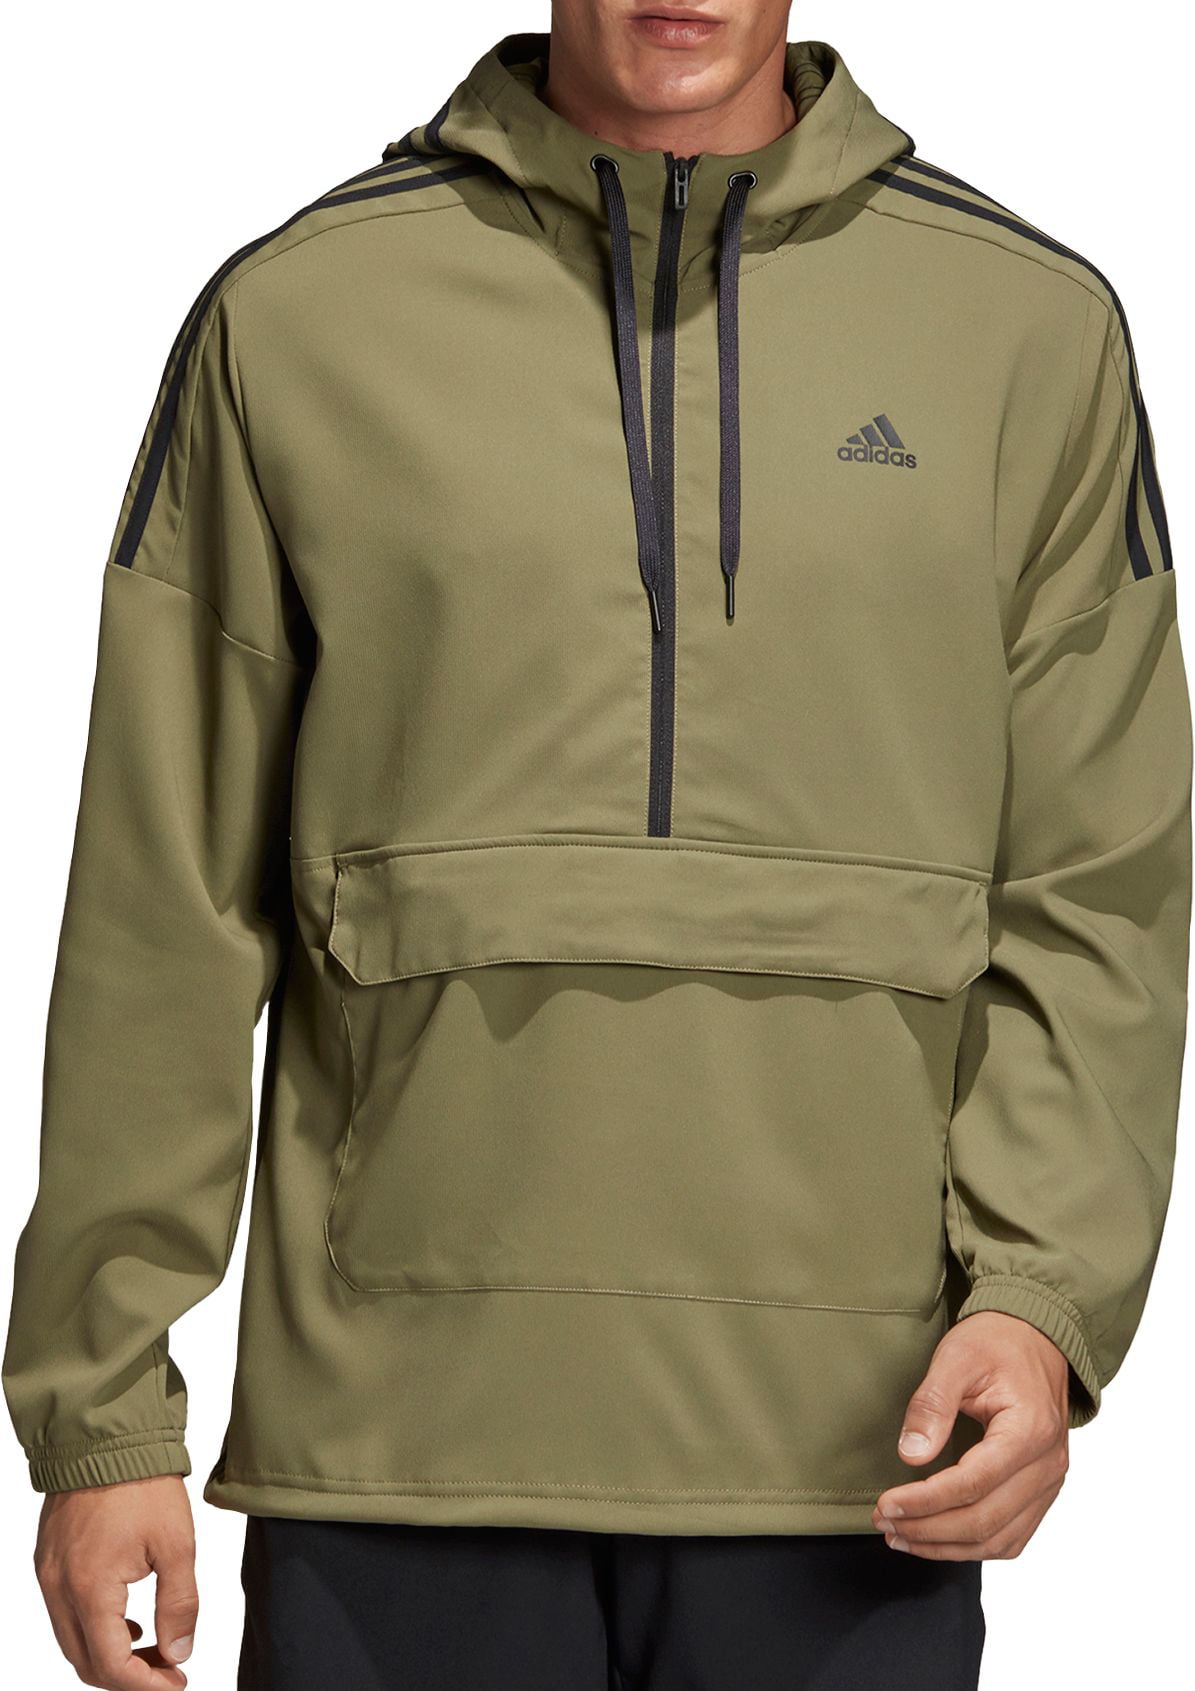 routed adidas windbreaker